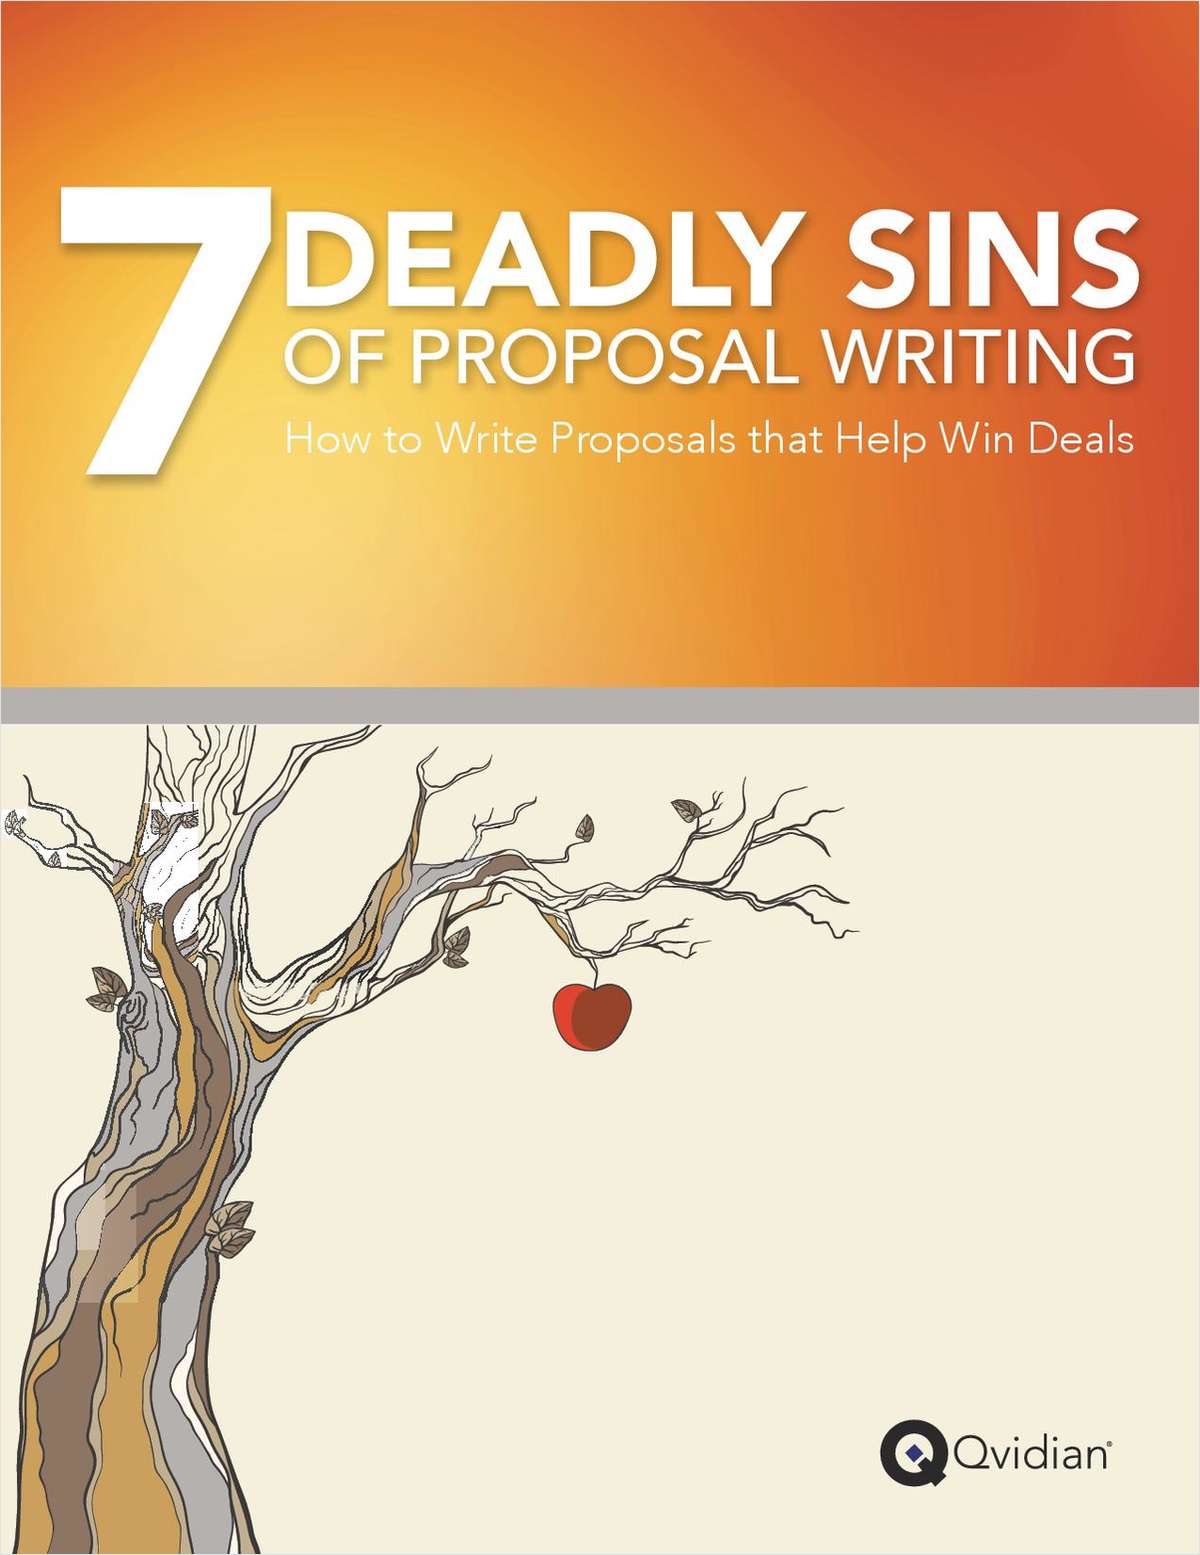 7 Deadly Sins of Proposal Writing